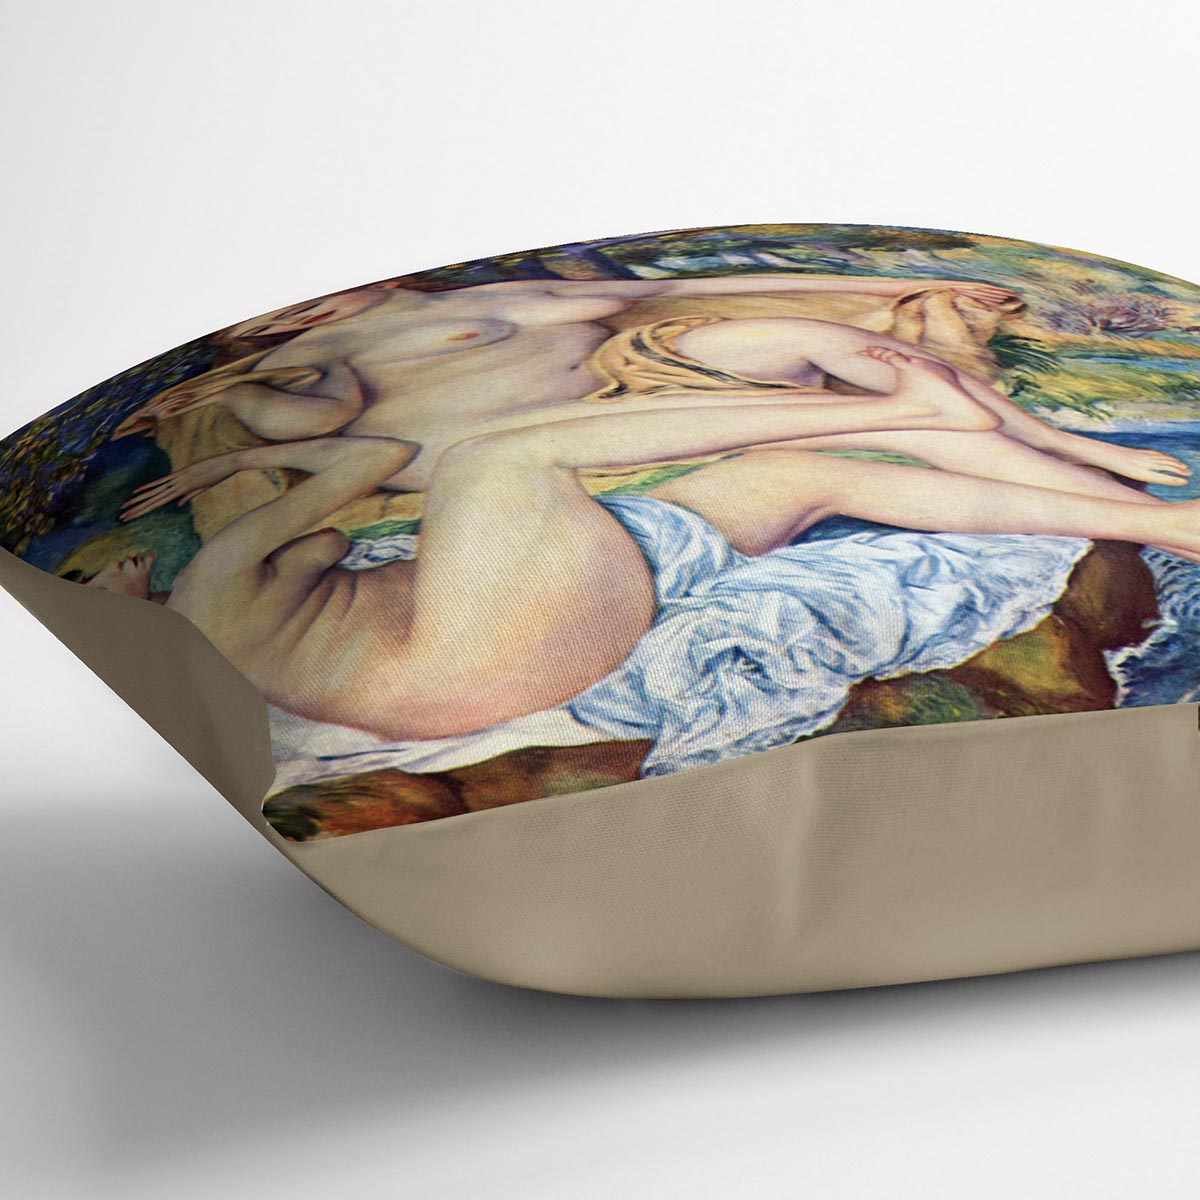 The Large Bathers by Renoir Cushion